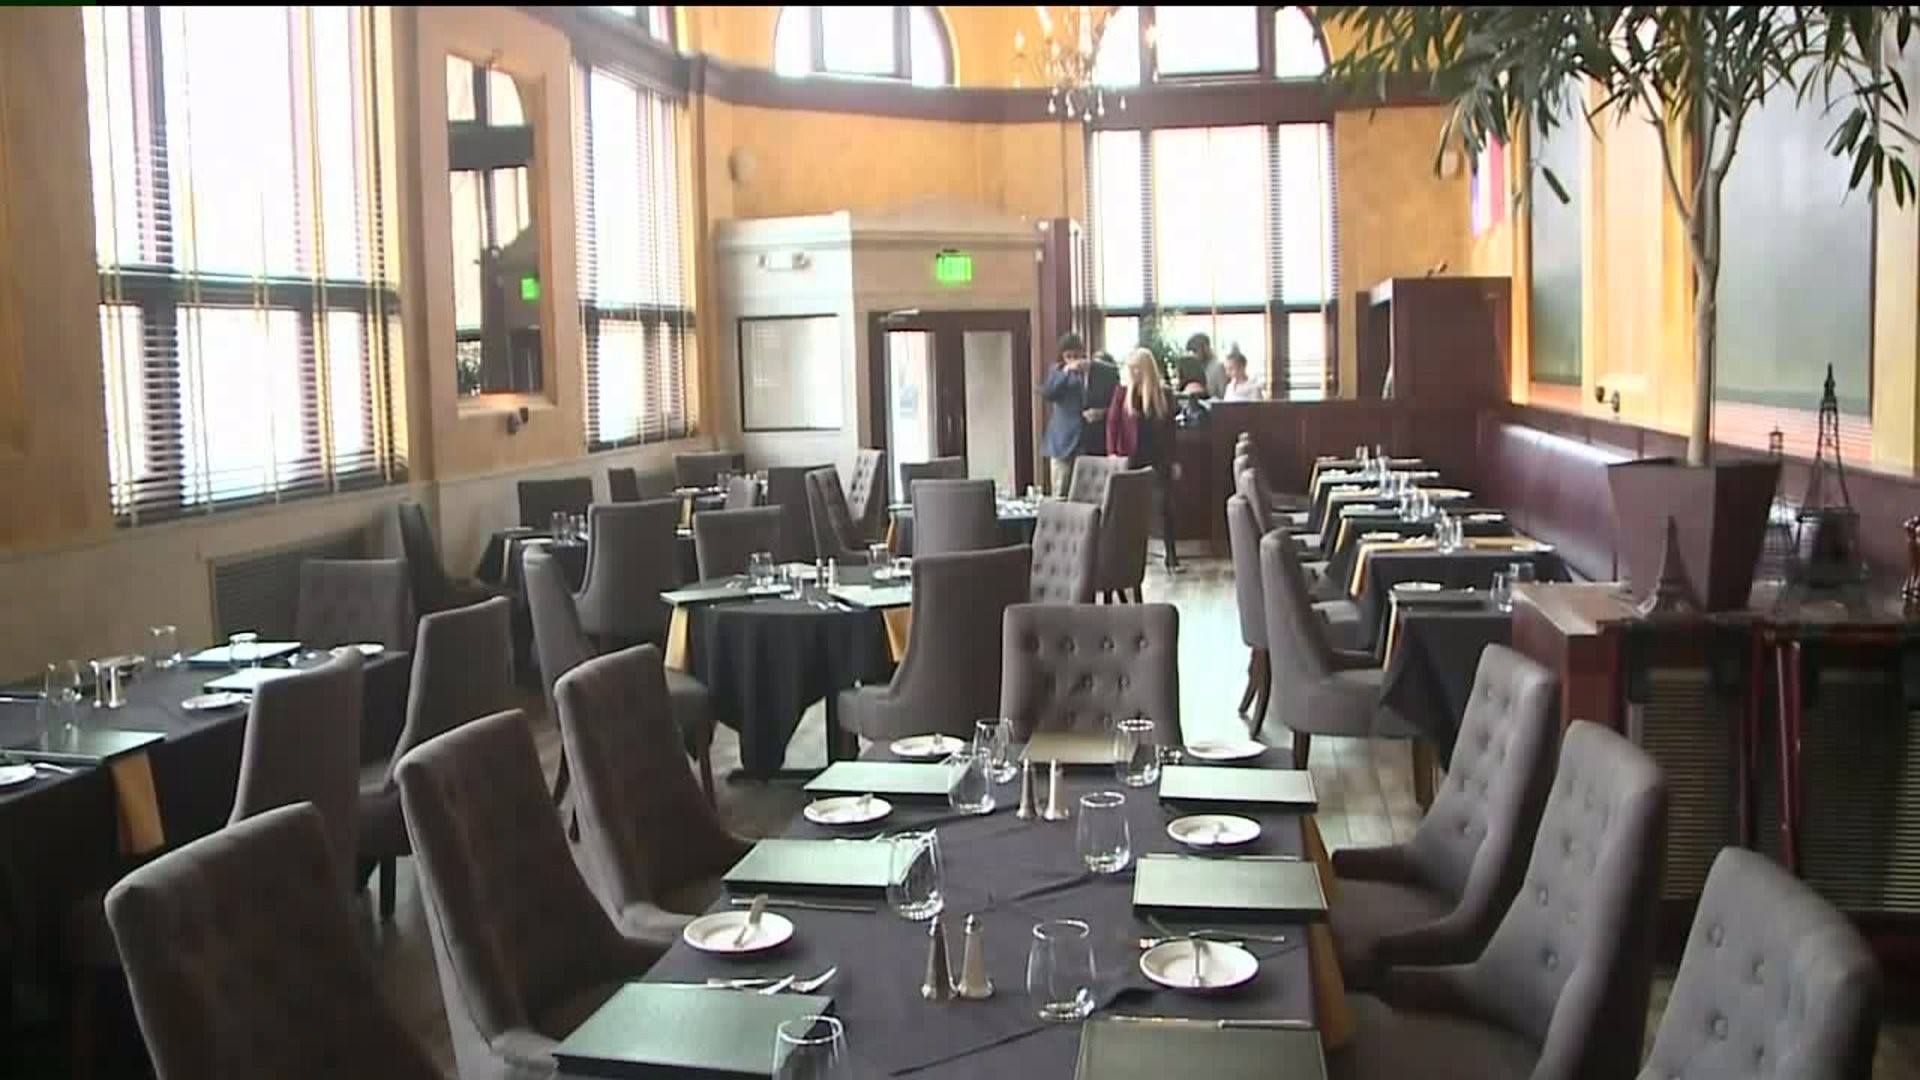 New Life for Upscale Bistro in Wilkes-Barre